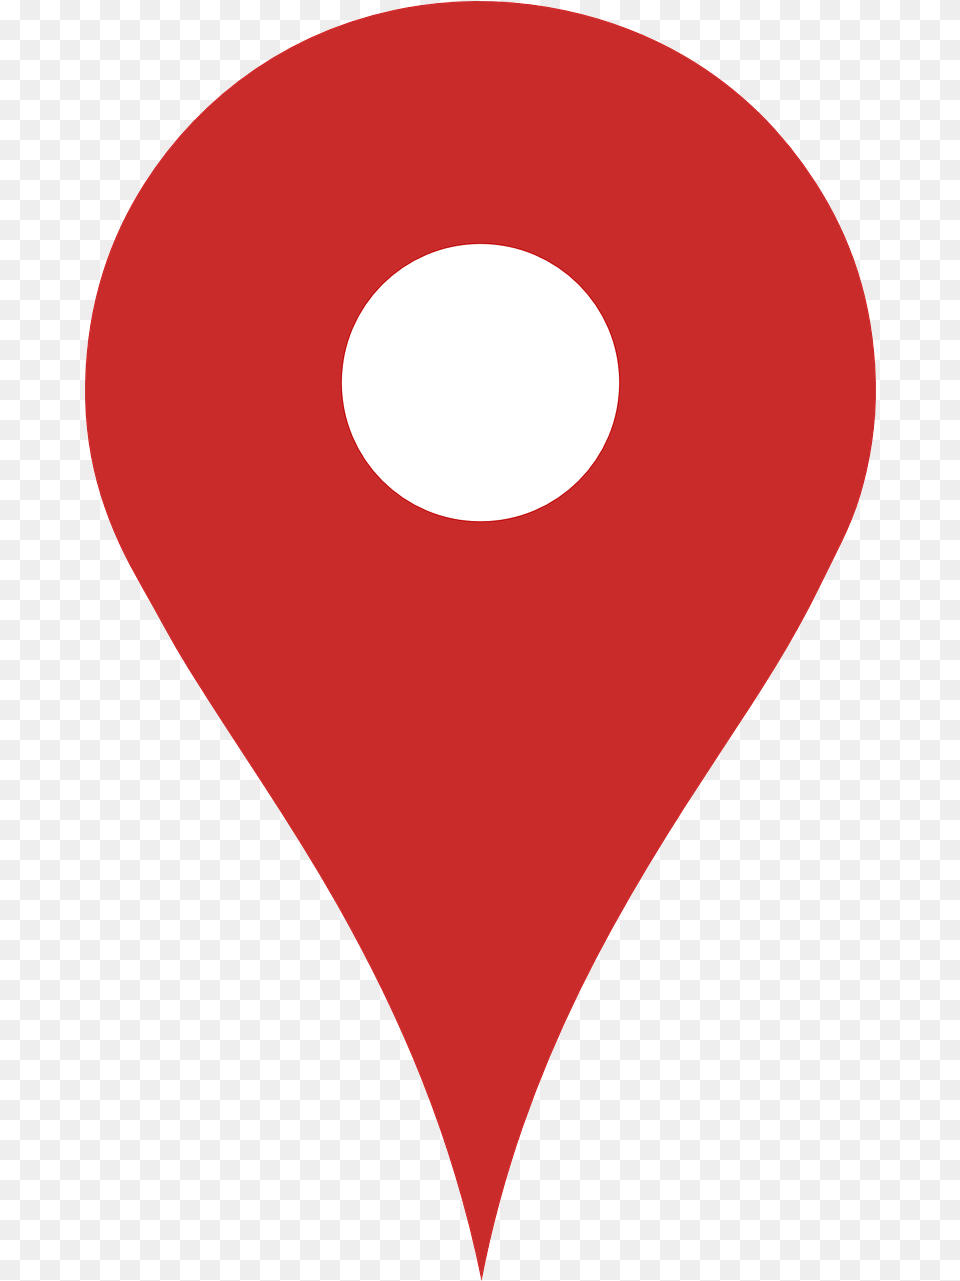 Download Map Google Pin Icons Maps Bush, Balloon, Heart, Astronomy, Moon Png